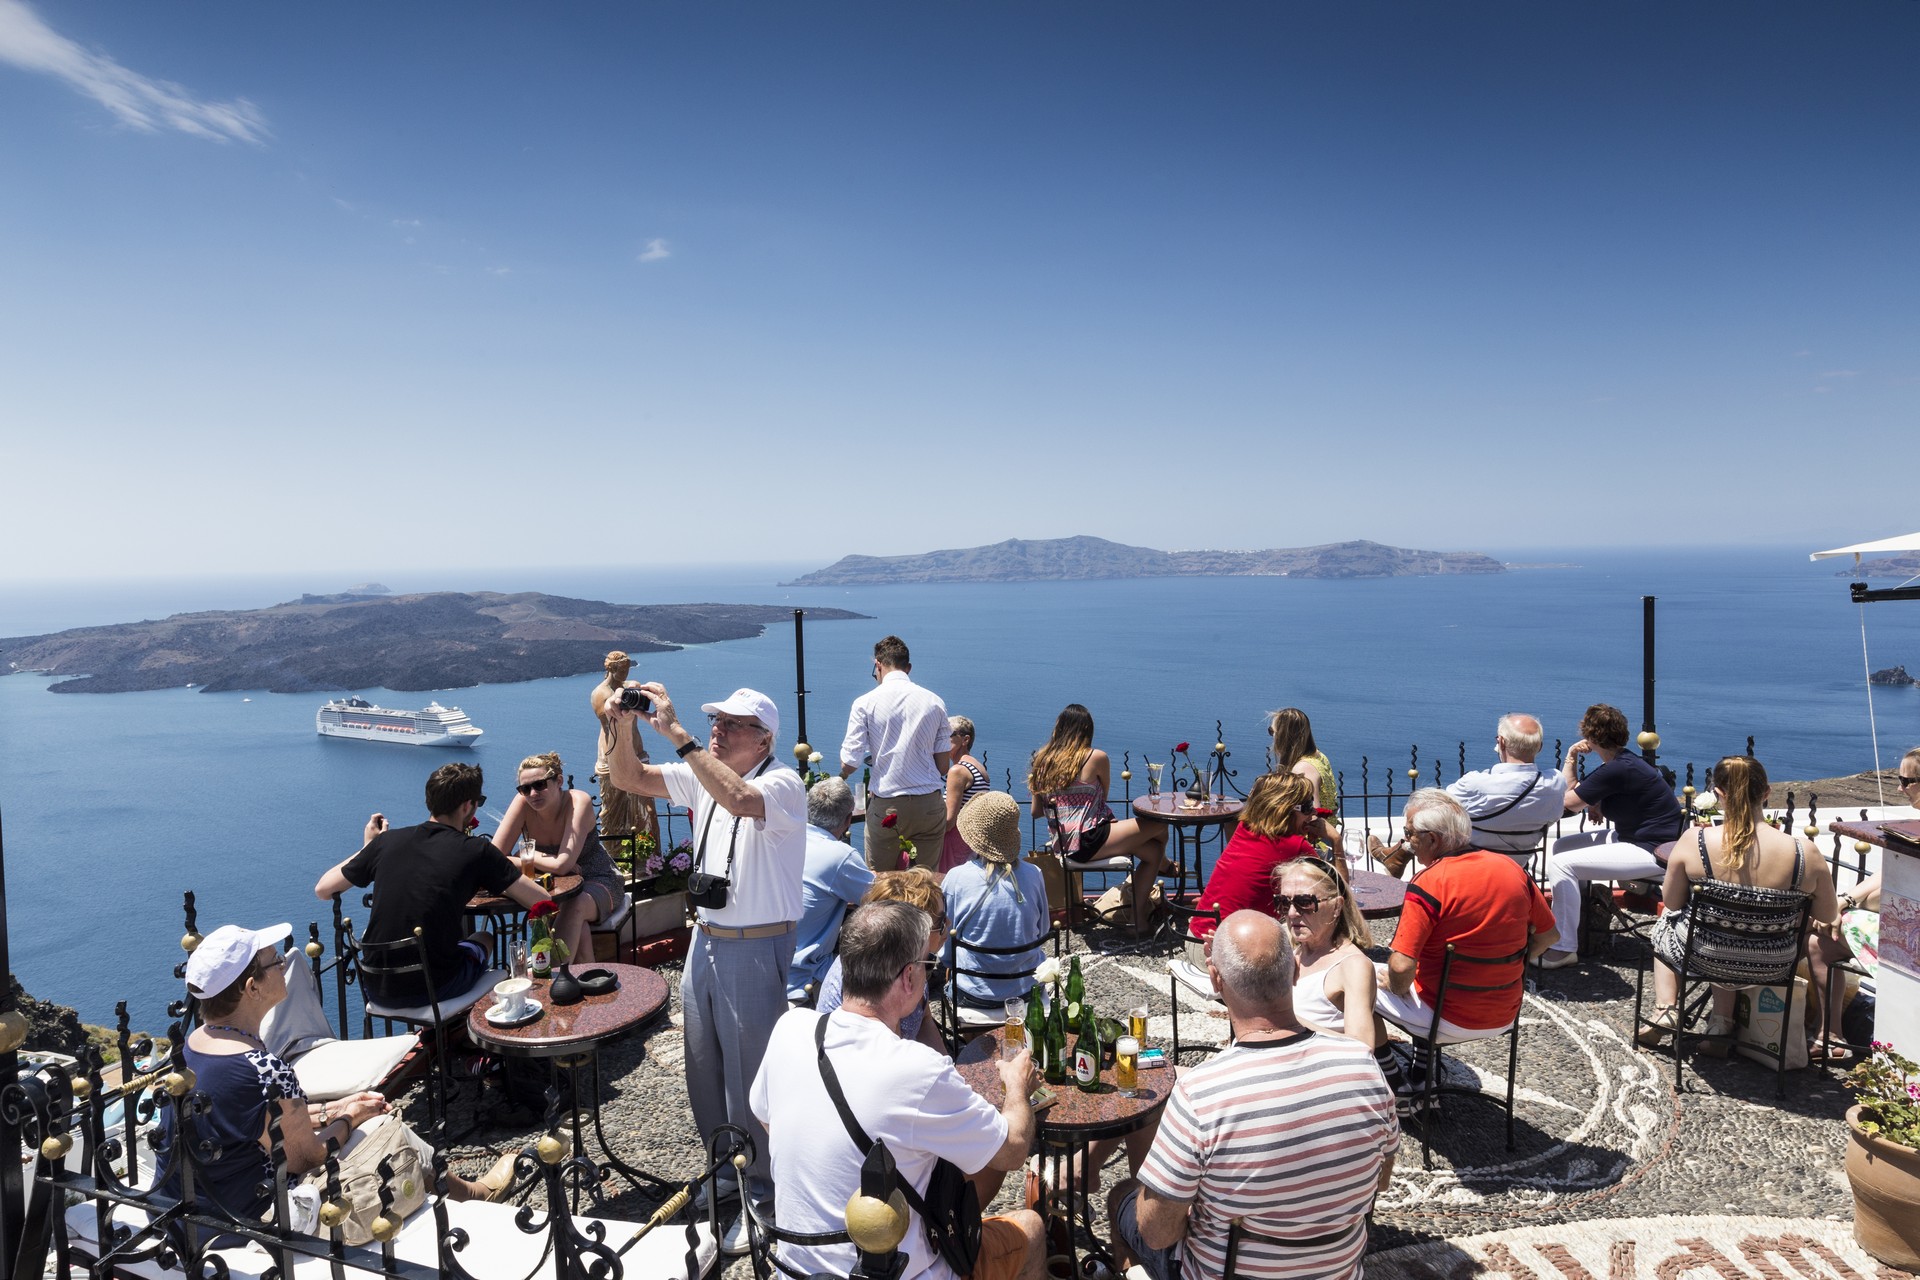 Santorini, Grece- May 13, 2015: Tourists Drink beverages in Local café while enjoying the view in Santorini island, Aegean sea in Greece.